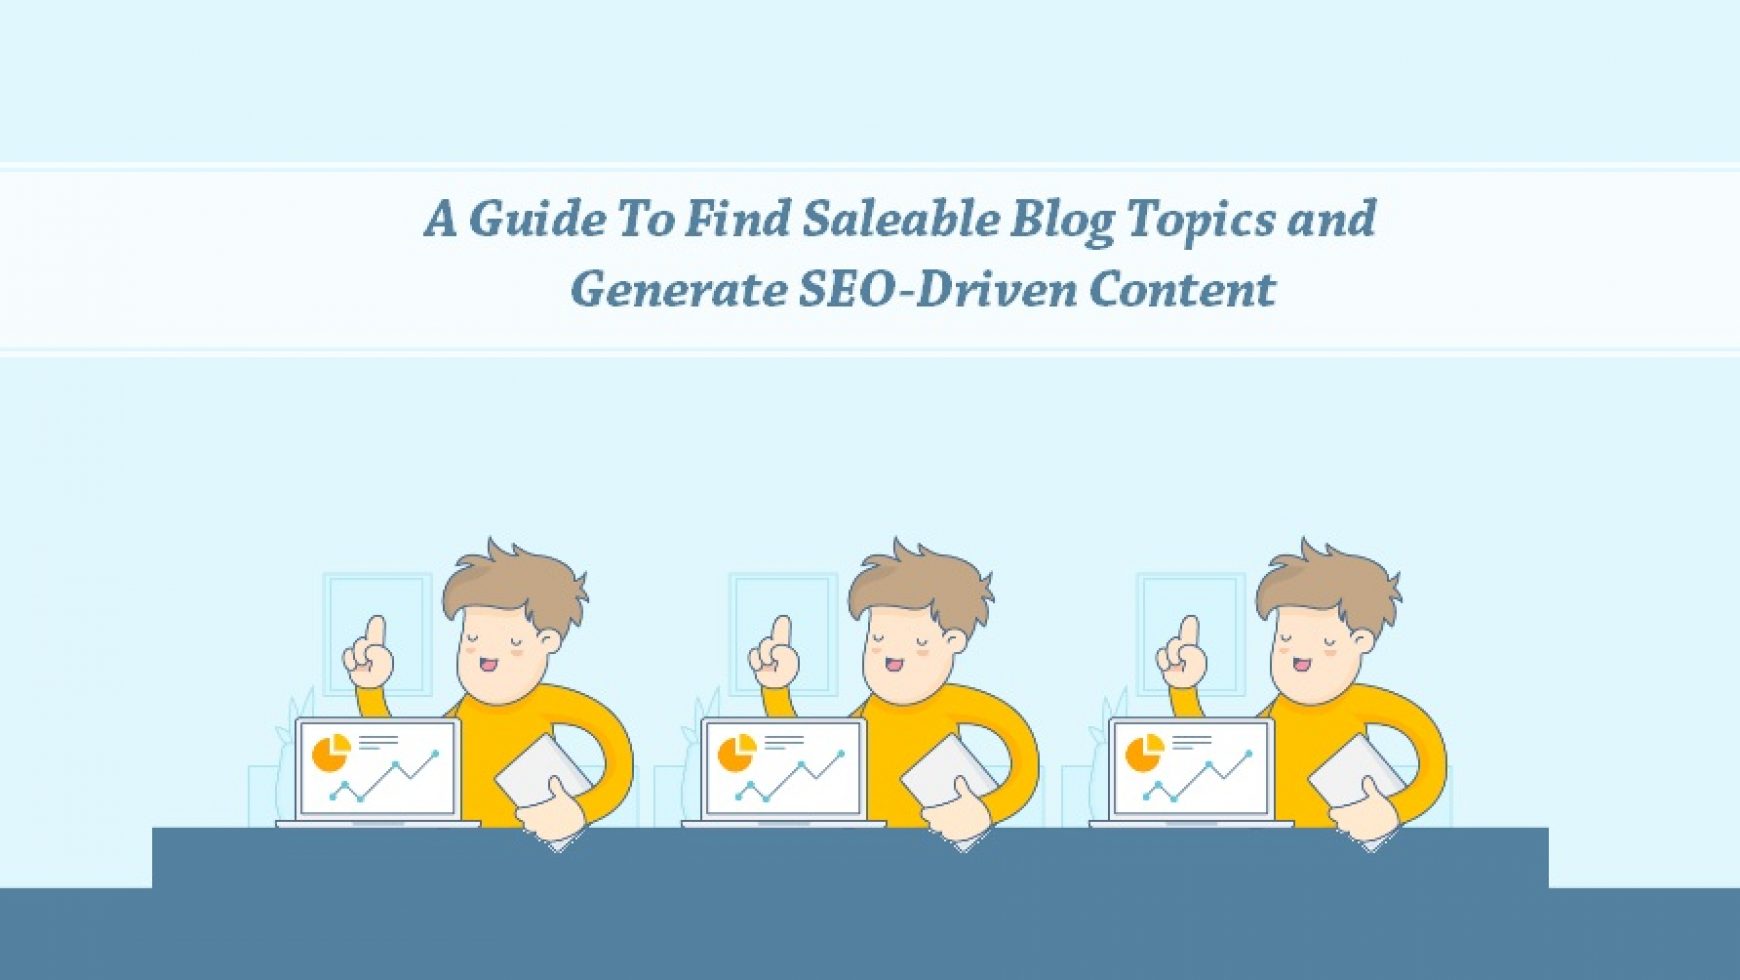 A Guide To Find Saleable Blog Topics and Generate SEO-Driven Content